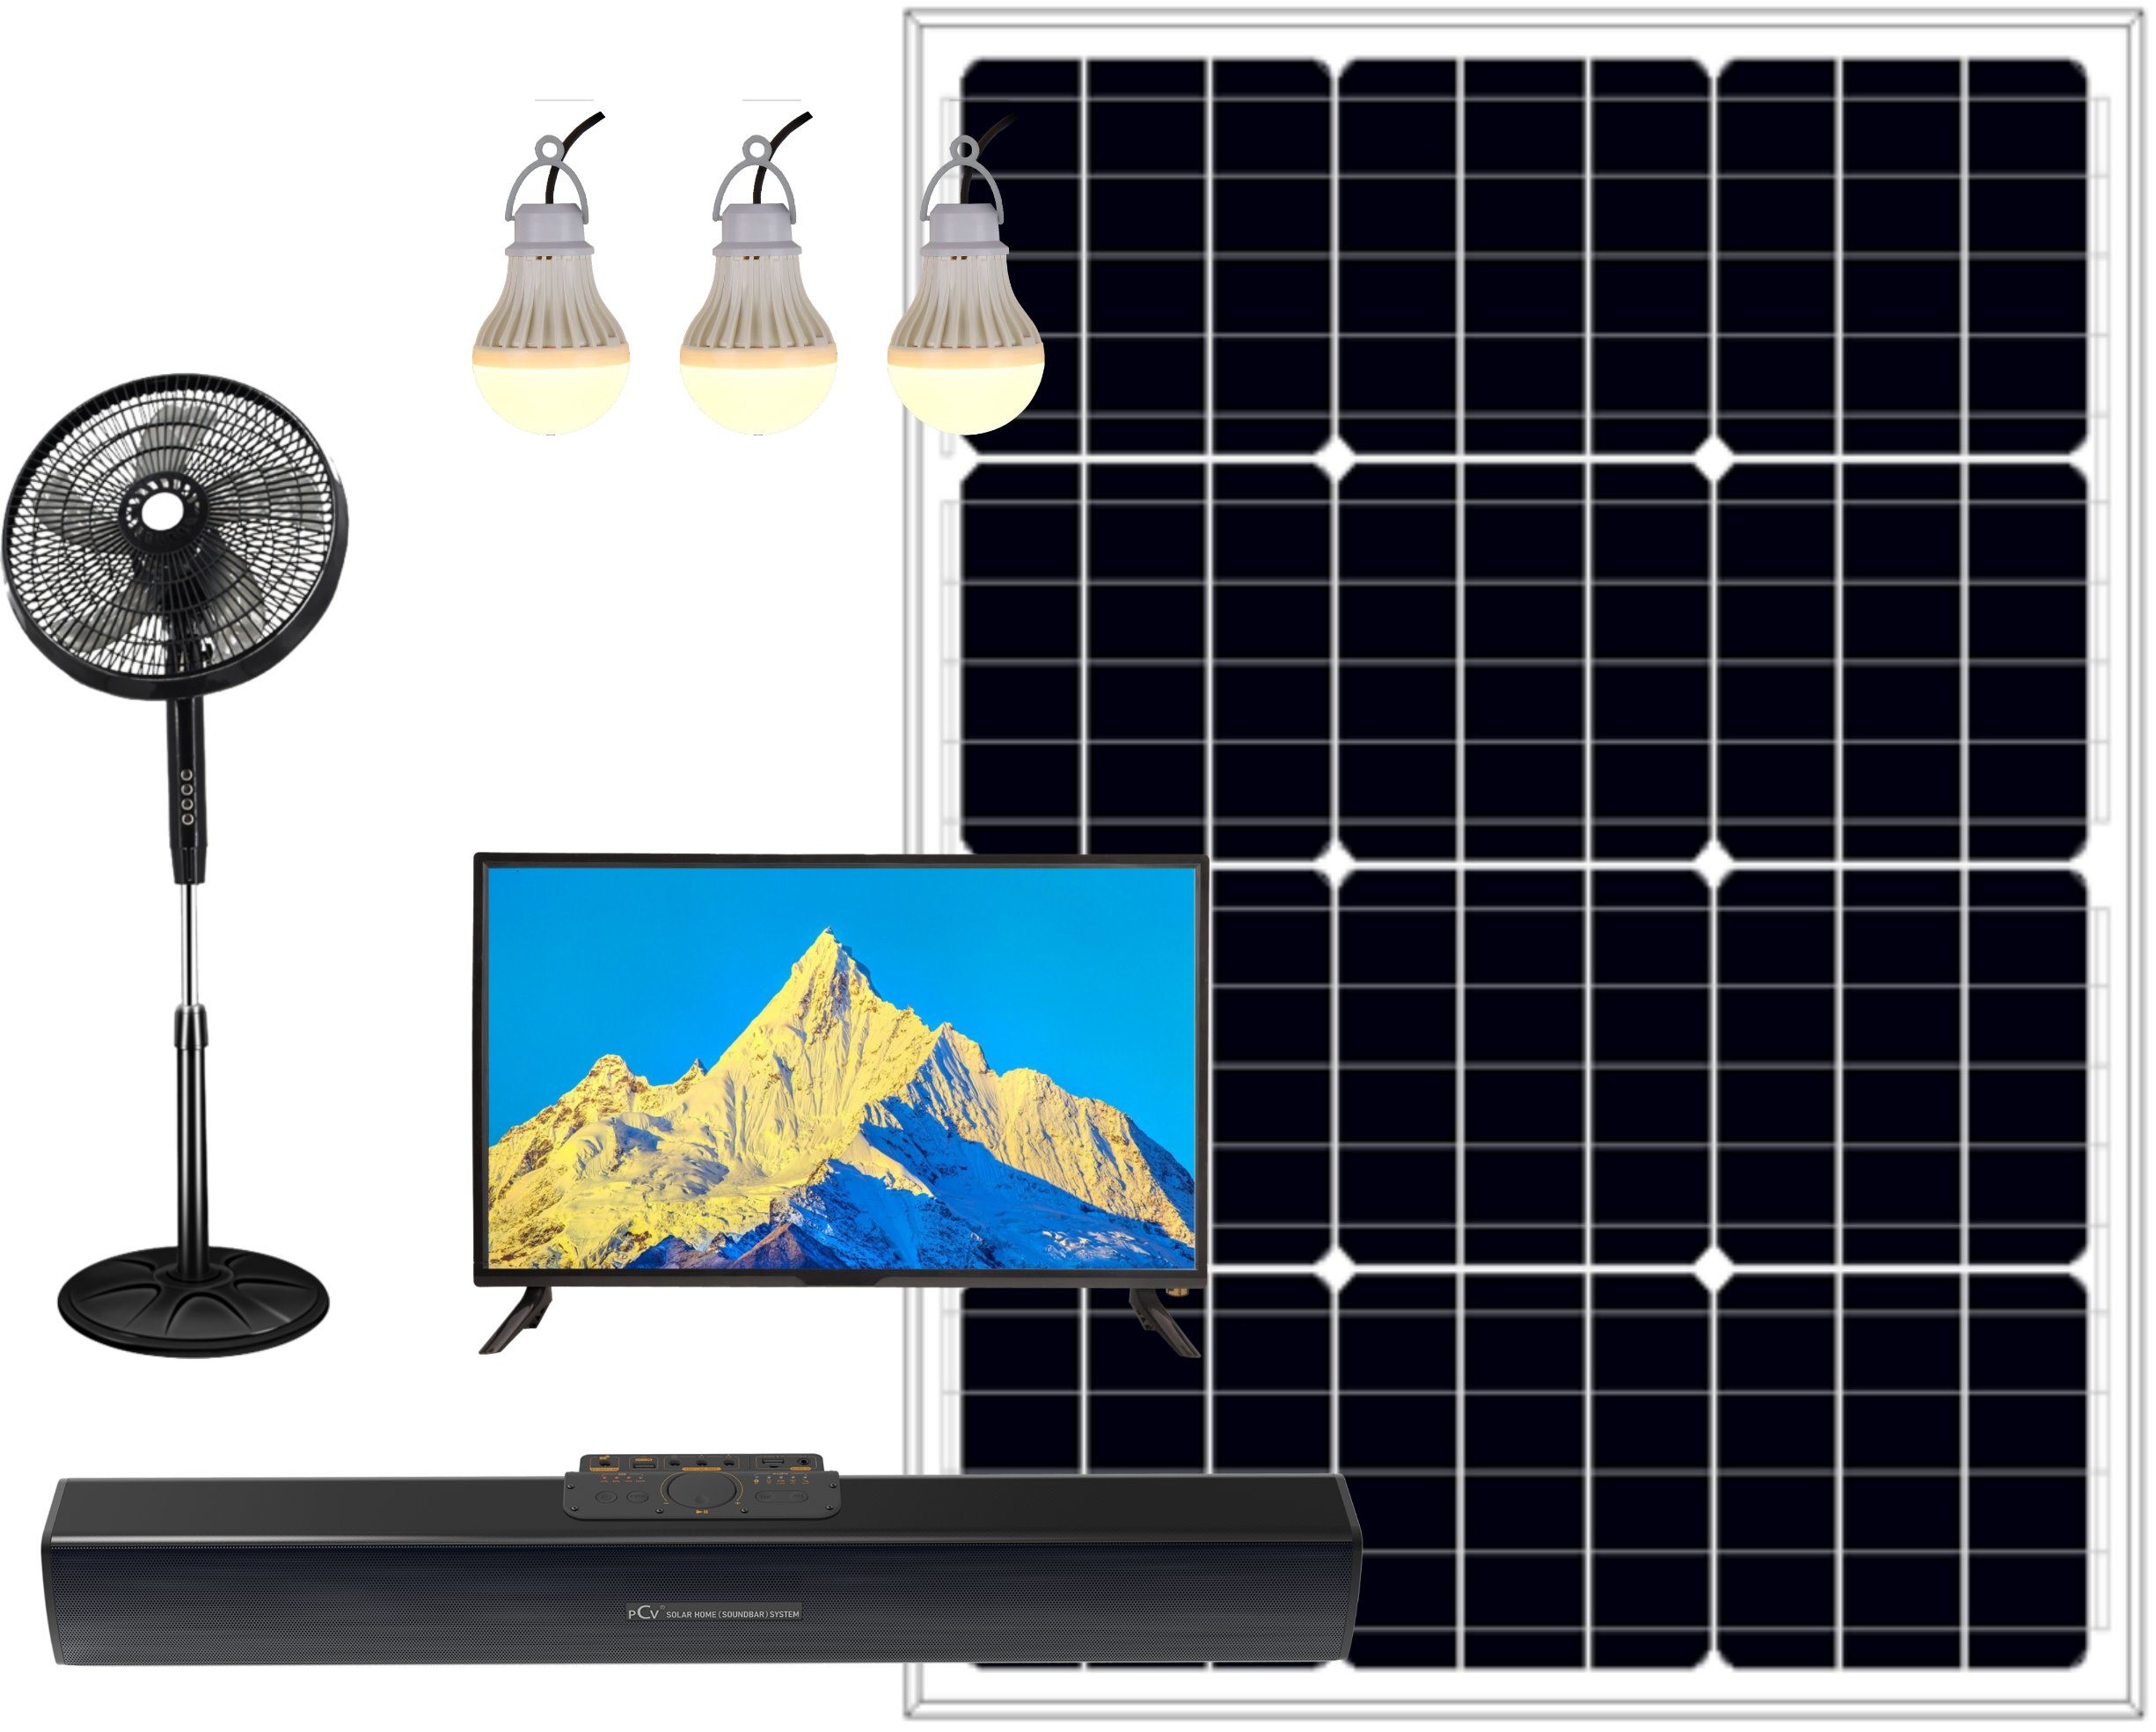 Rechargeable by Solar and AC Soundbar 22inch TV Fan Bulbs 25W Solar Panel for Solar Home System